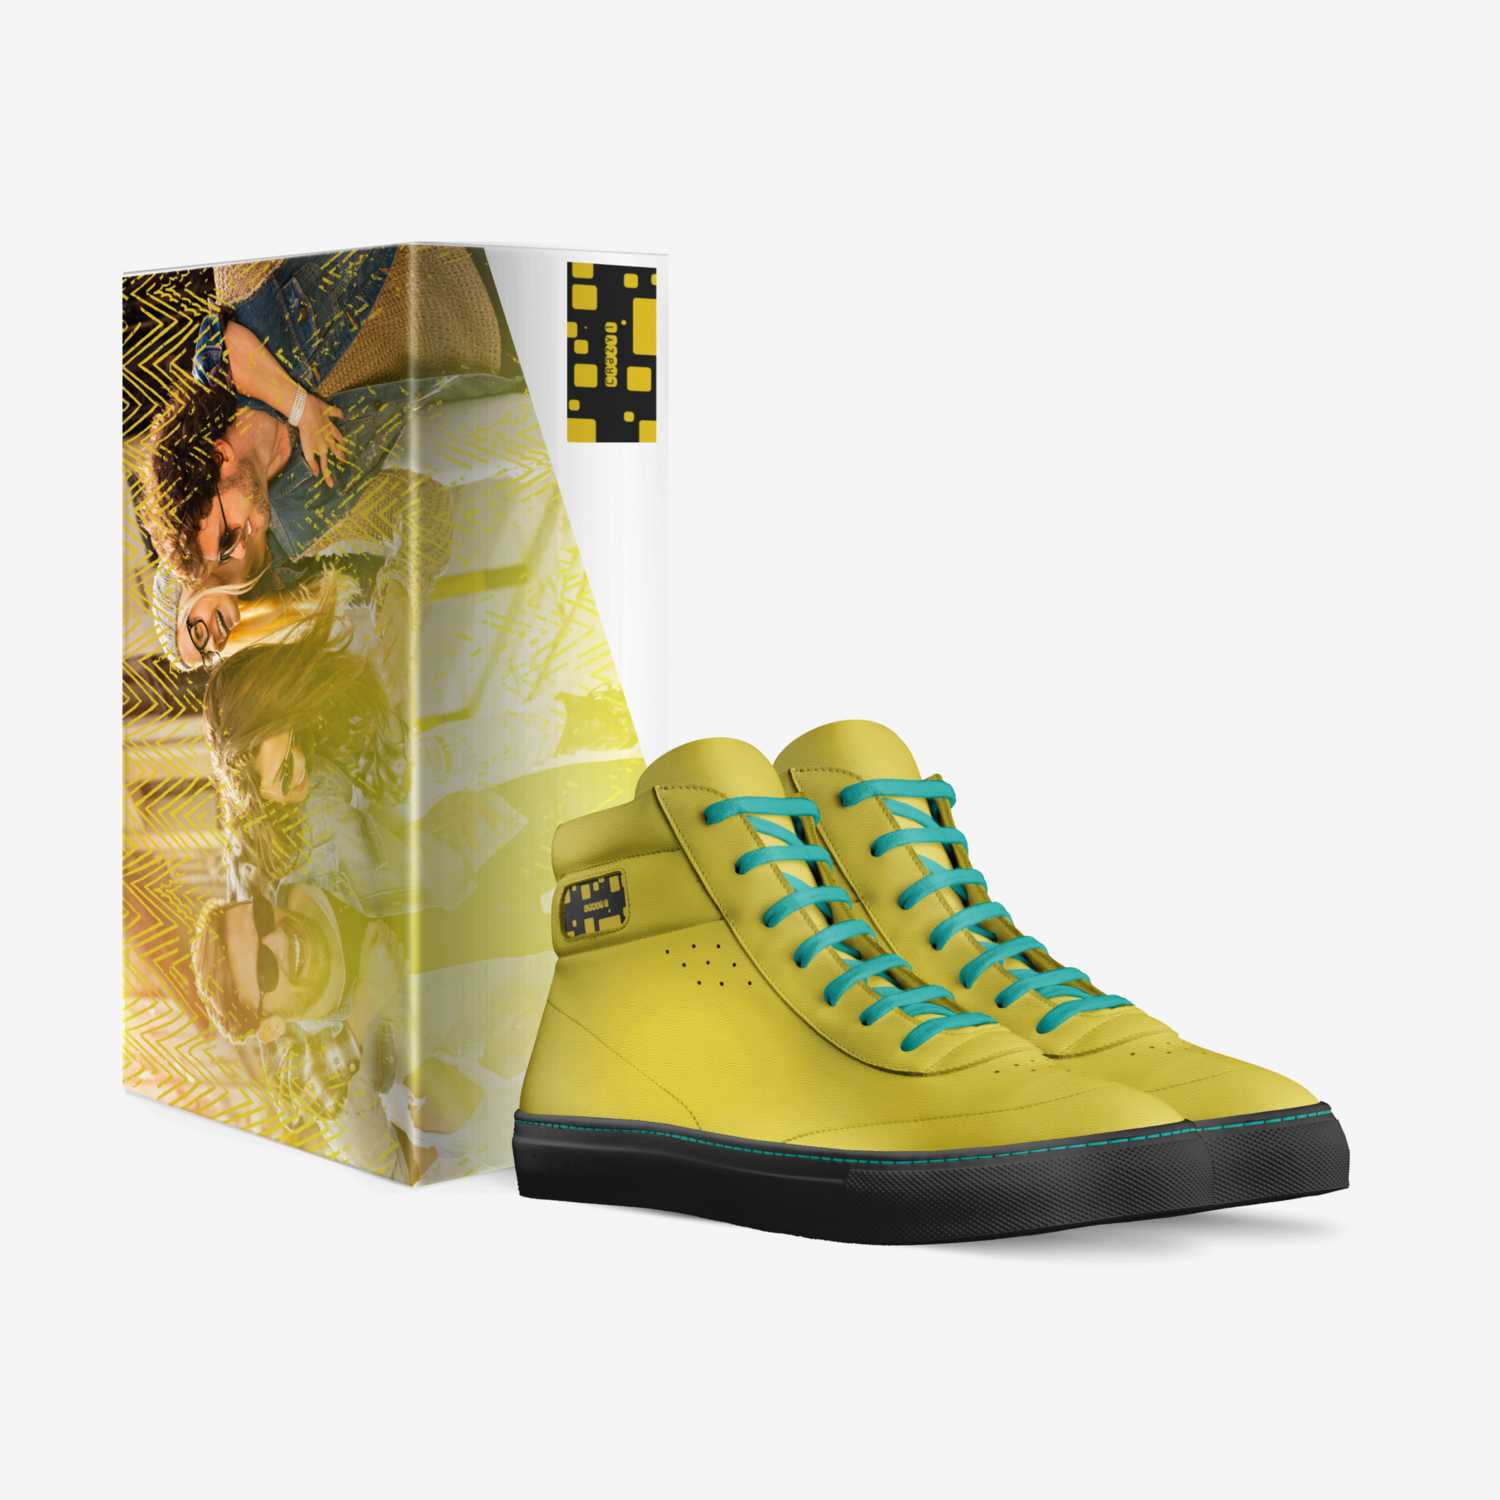 Crazy 1 custom made in Italy shoes by Lutz Montgomery | Box view